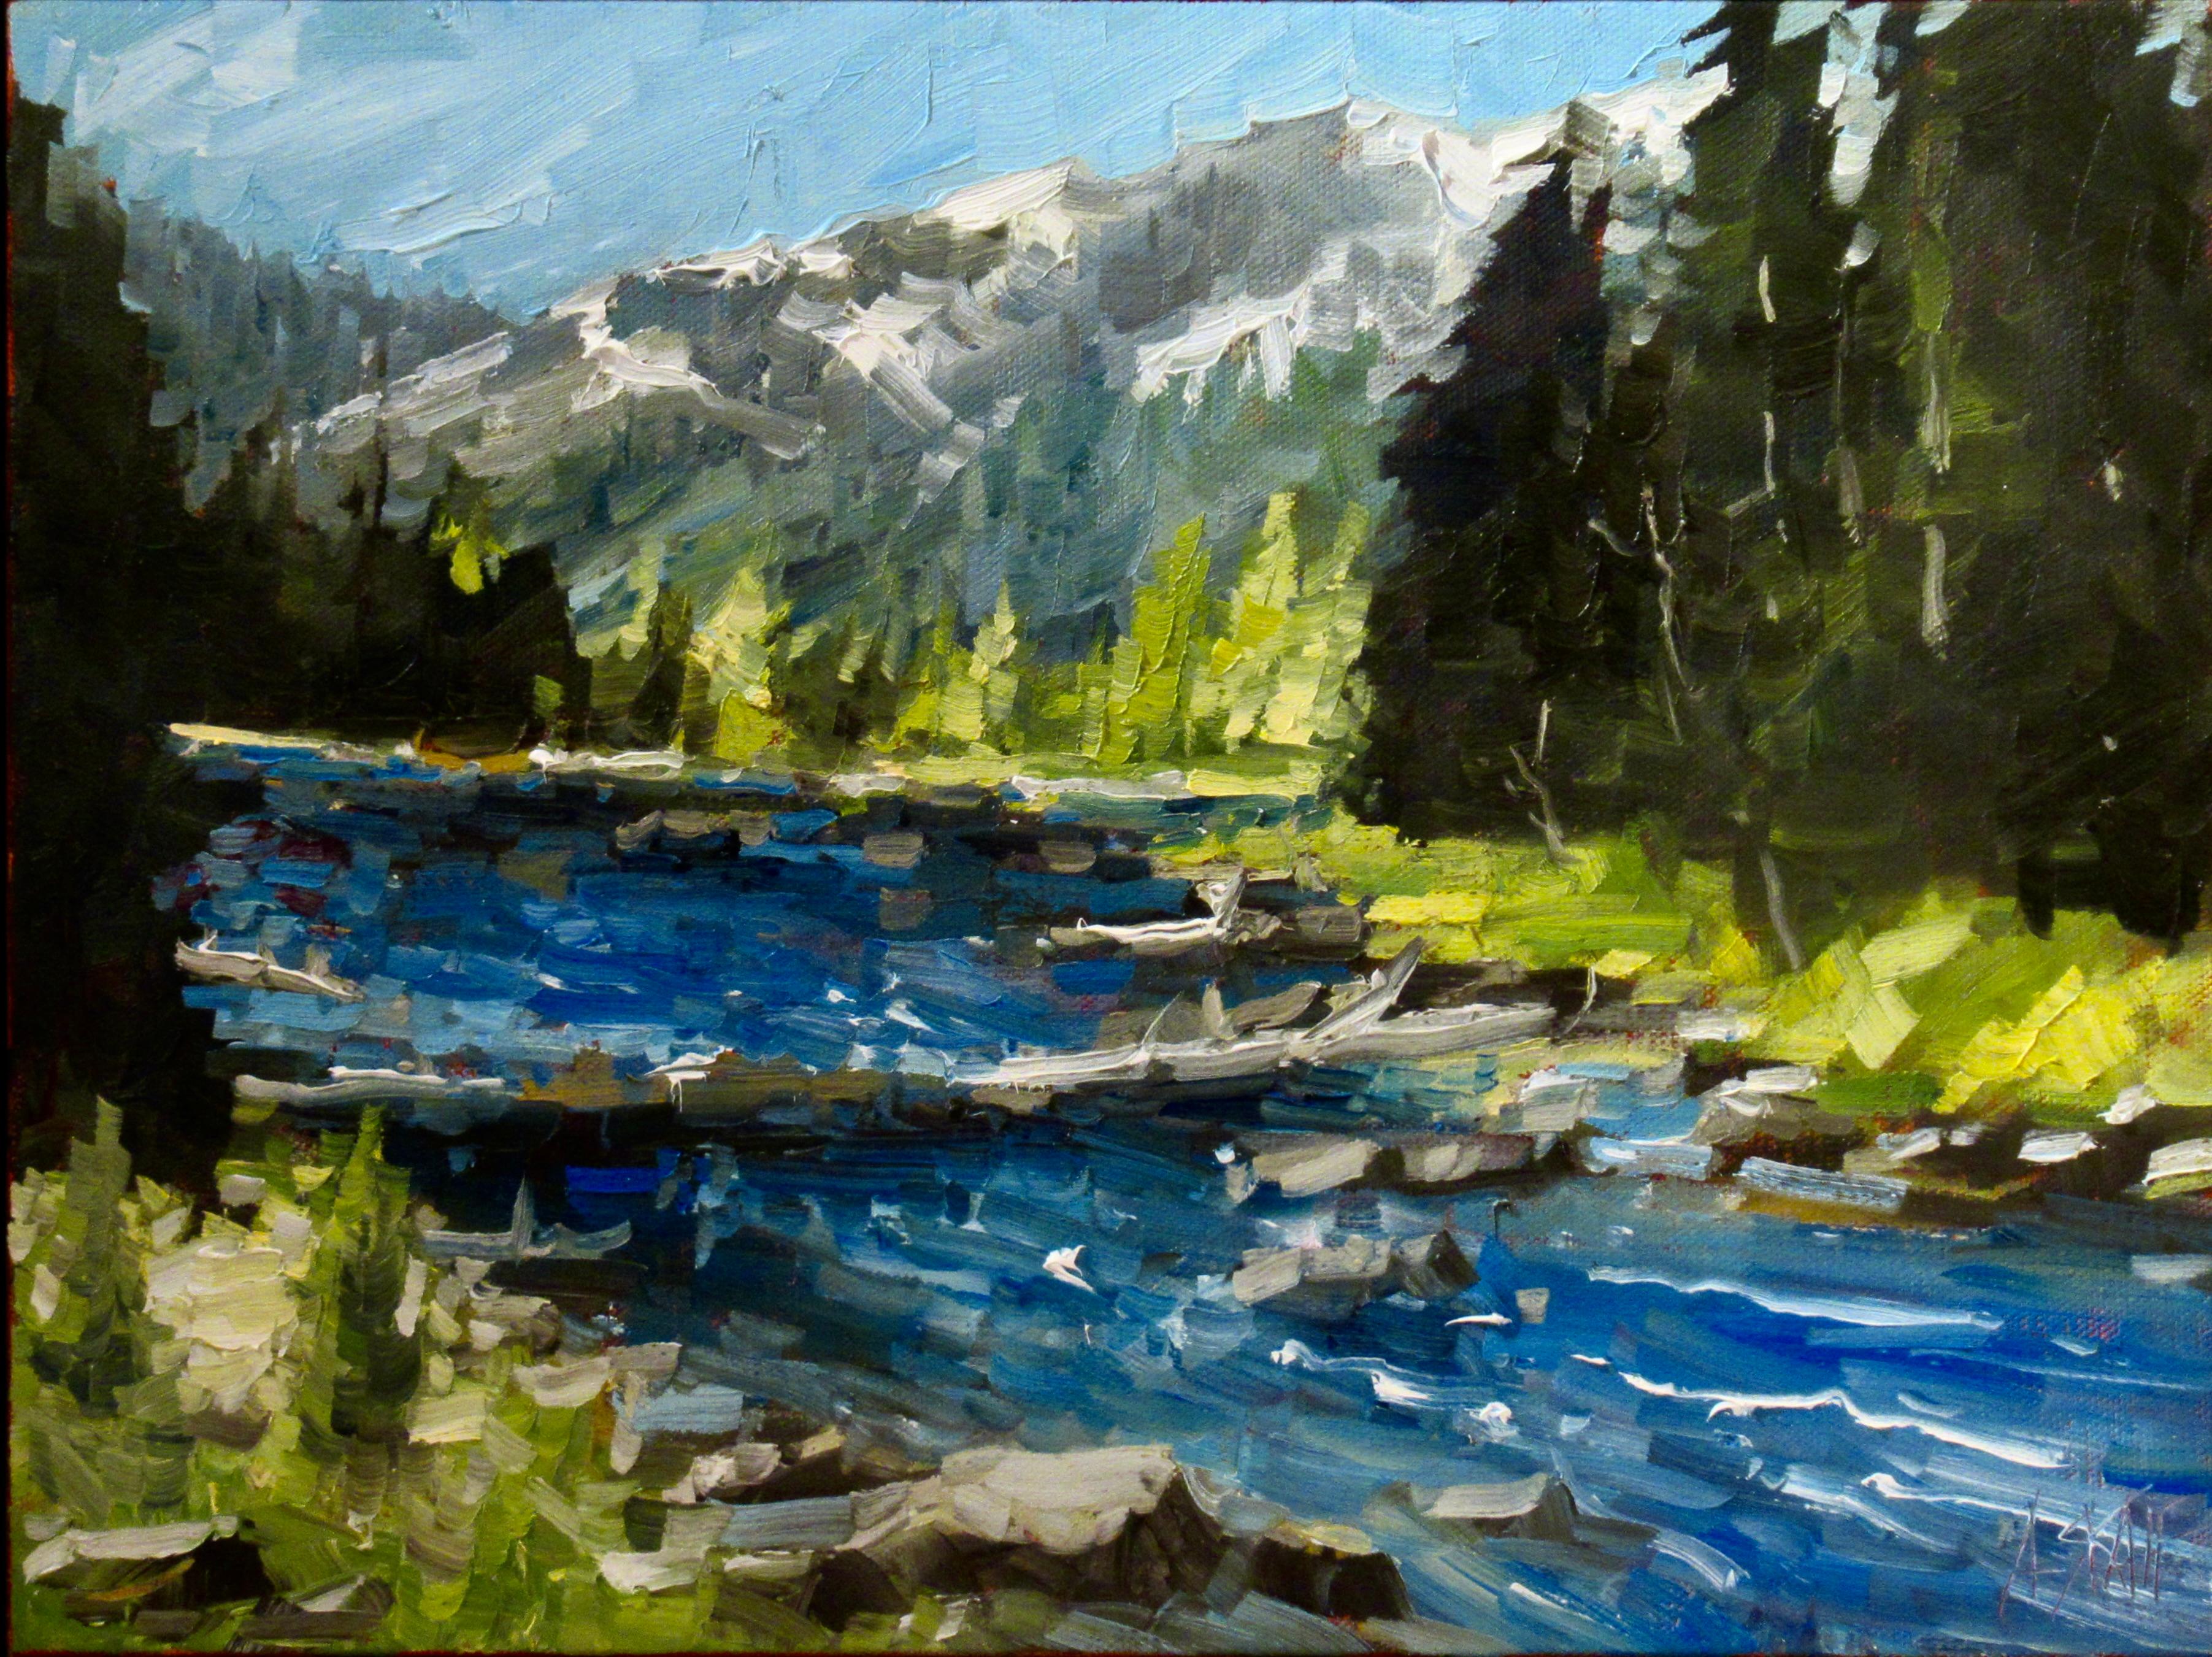 Blackwood Spring Runoff - Painting by Andrew (Andy) Skaff